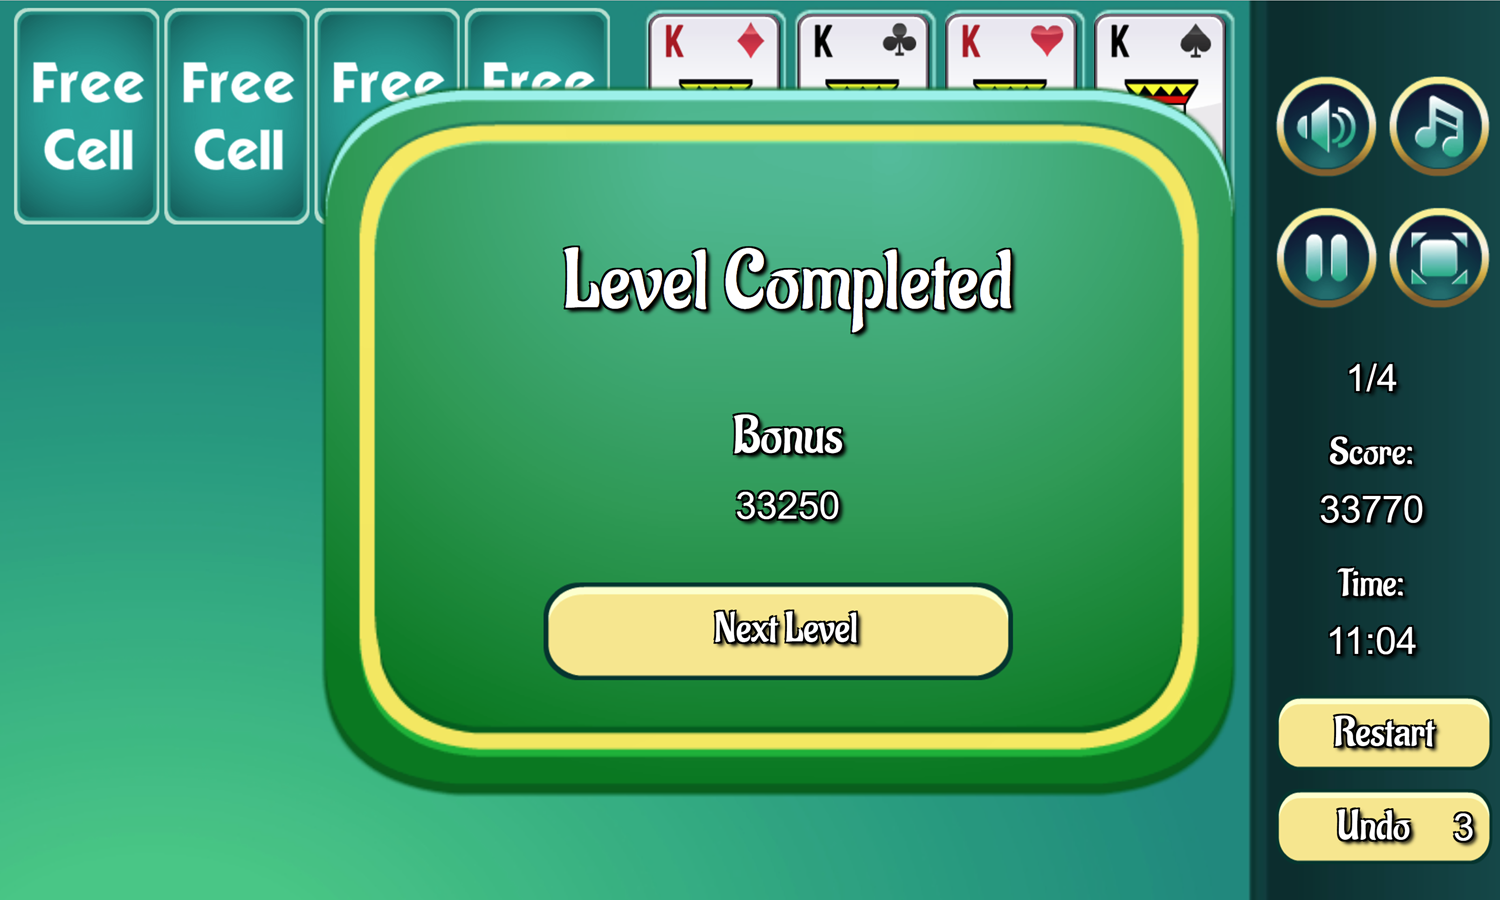 Freecell Extreme Game Level Completed Screen Screenshot.